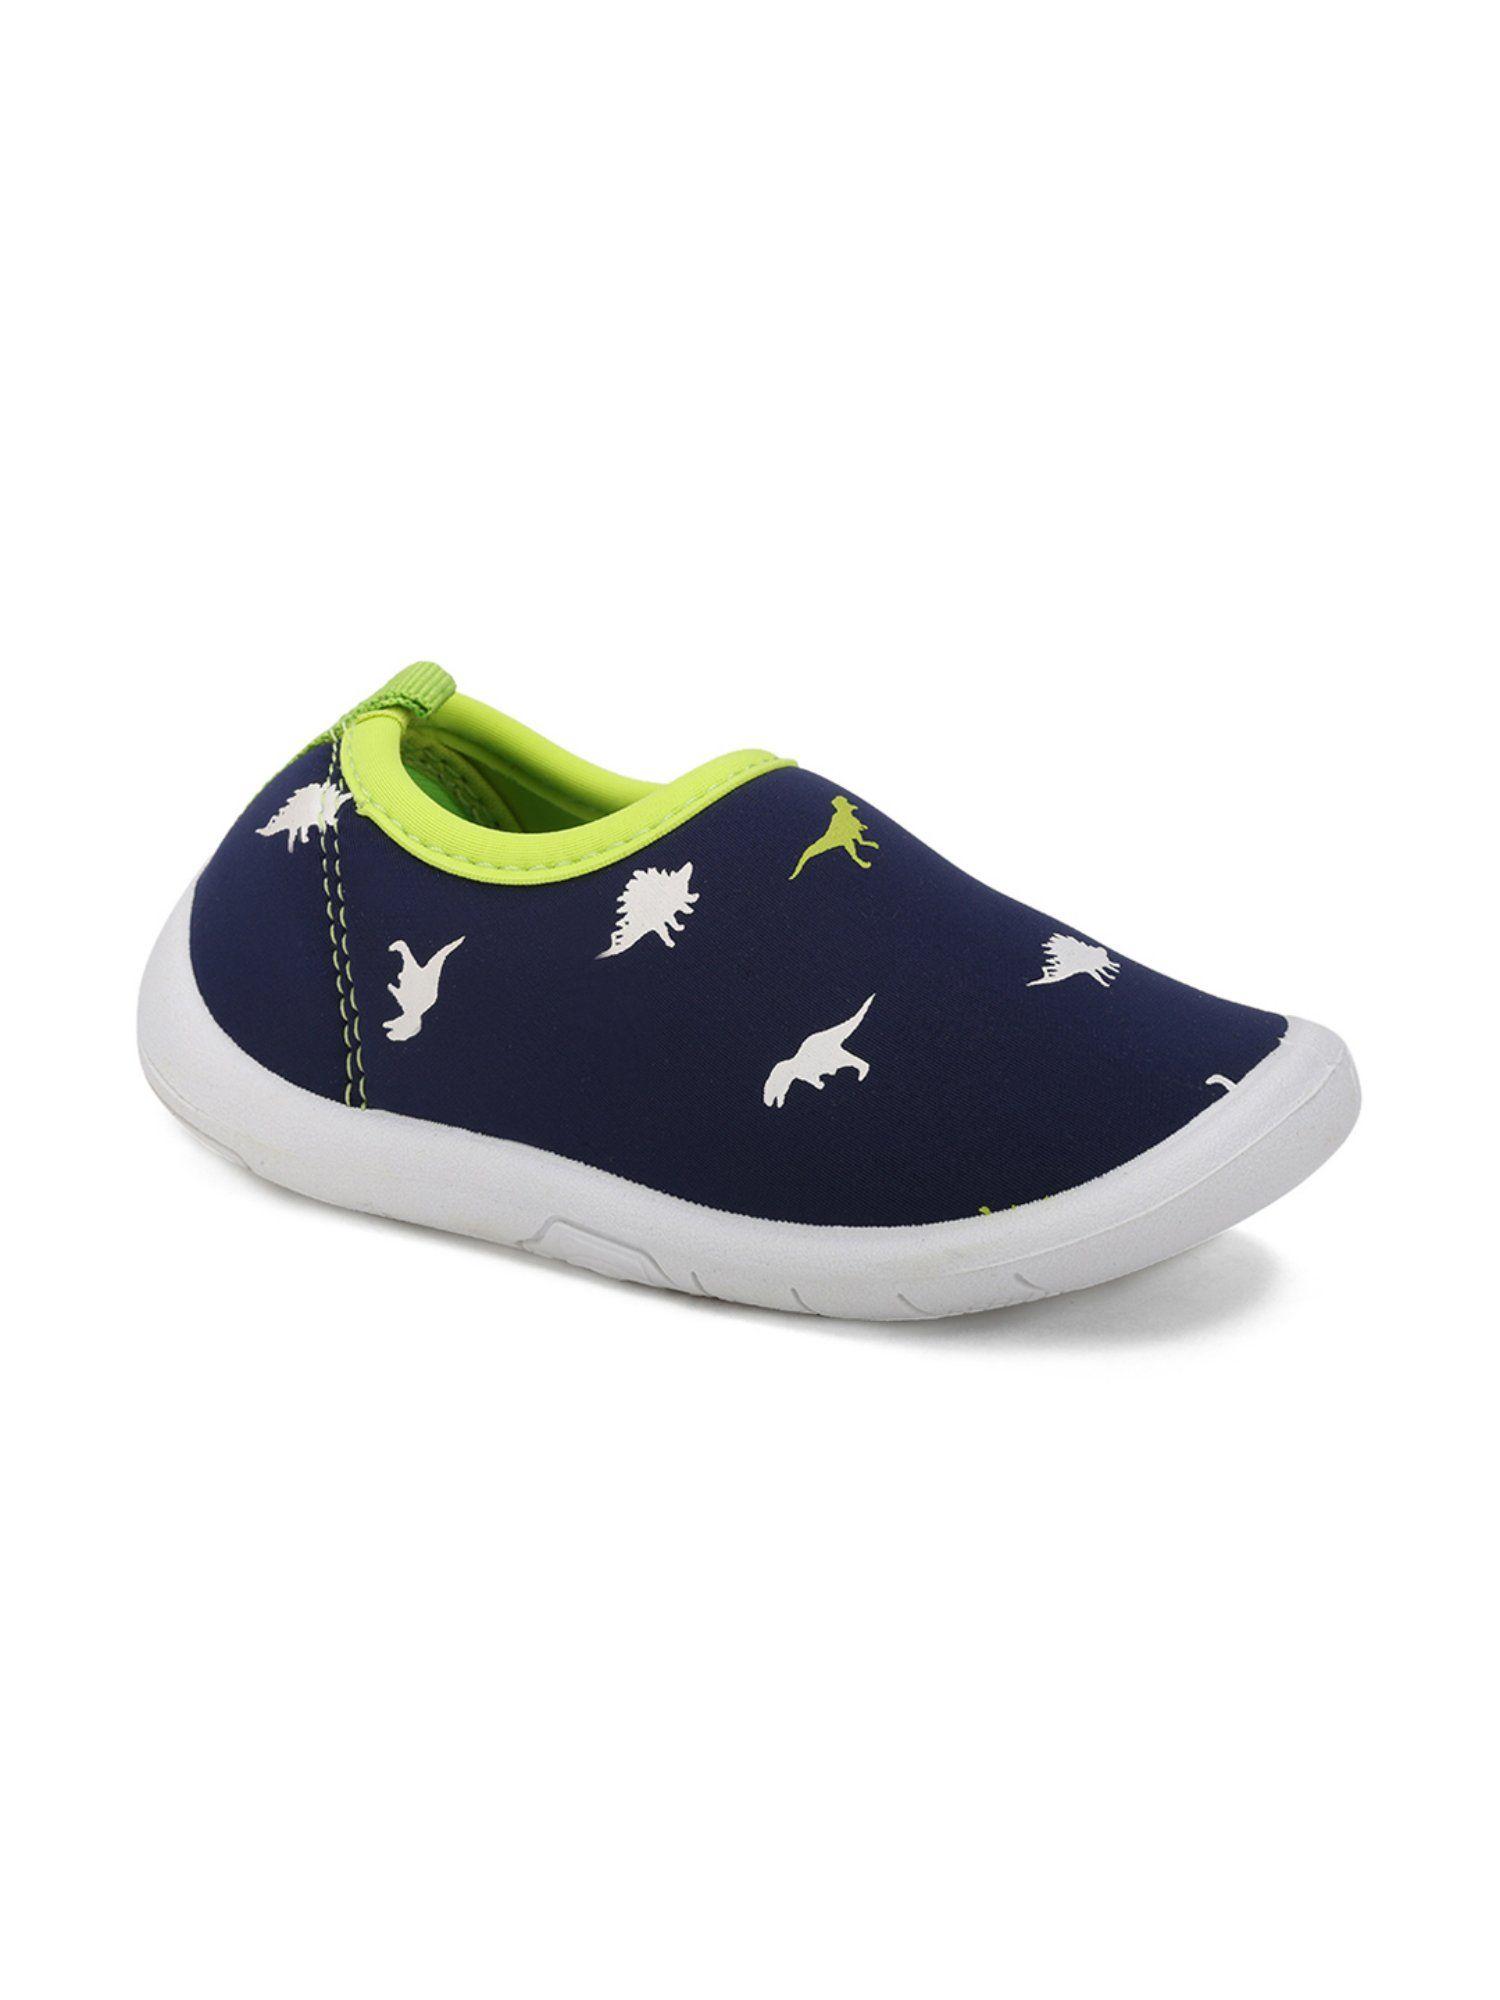 kids slip on casual shoes